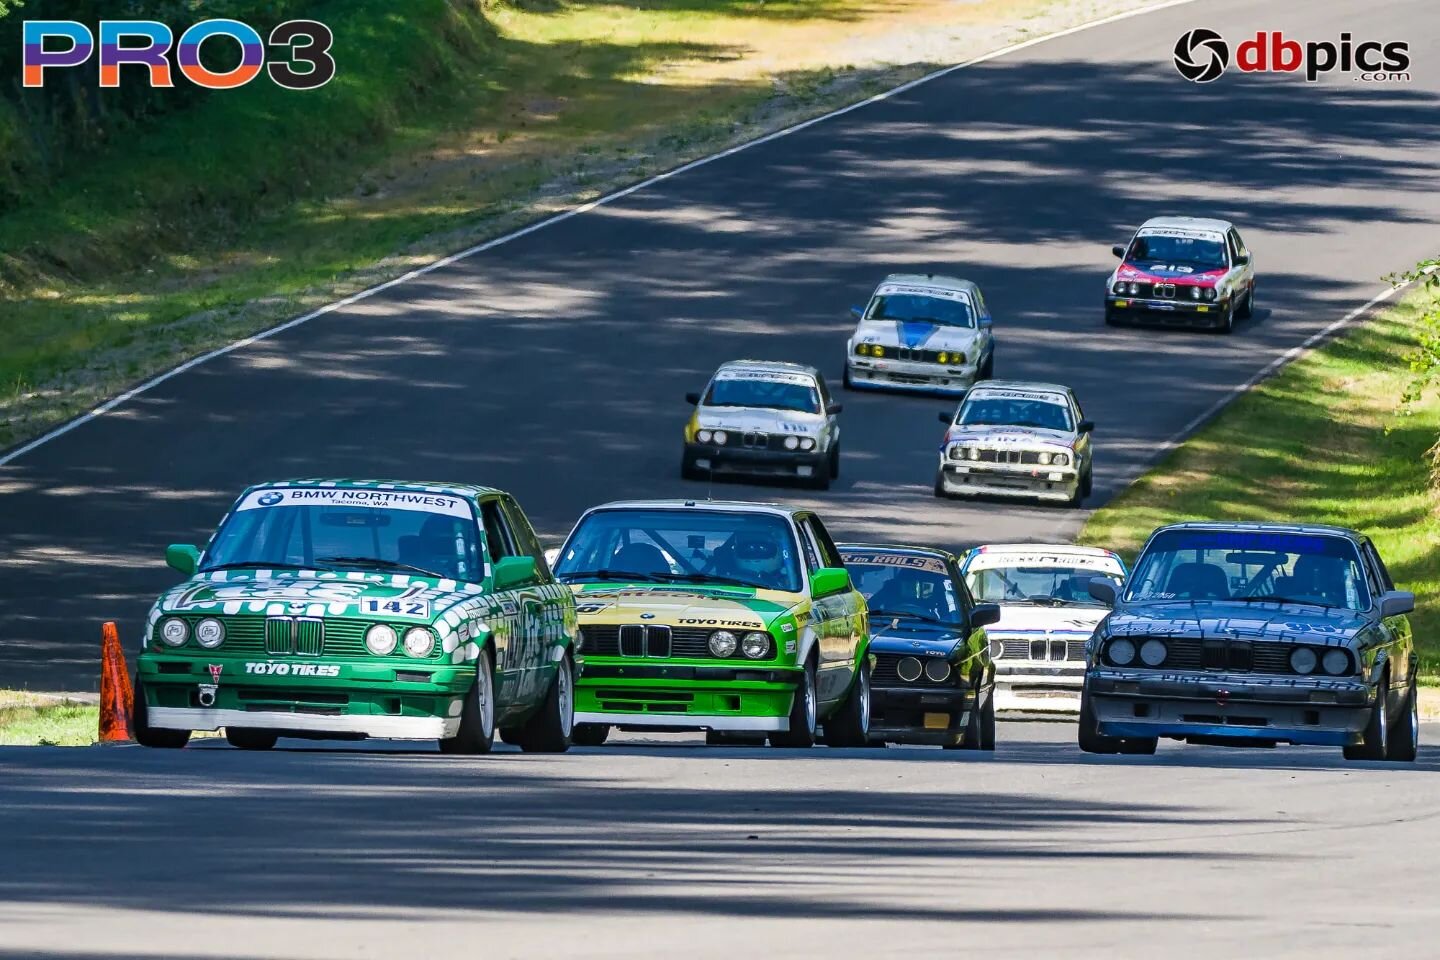 If you&rsquo;re anywhere near Seattle this weekend (July 16-17), you don&rsquo;t want to miss this! It&rsquo;s our biggest PRO3 Race ever&mdash;with over 50 PRO3 cars track for 3 big races. There will also be Charity Races and special 20th&nbsp;Anniv